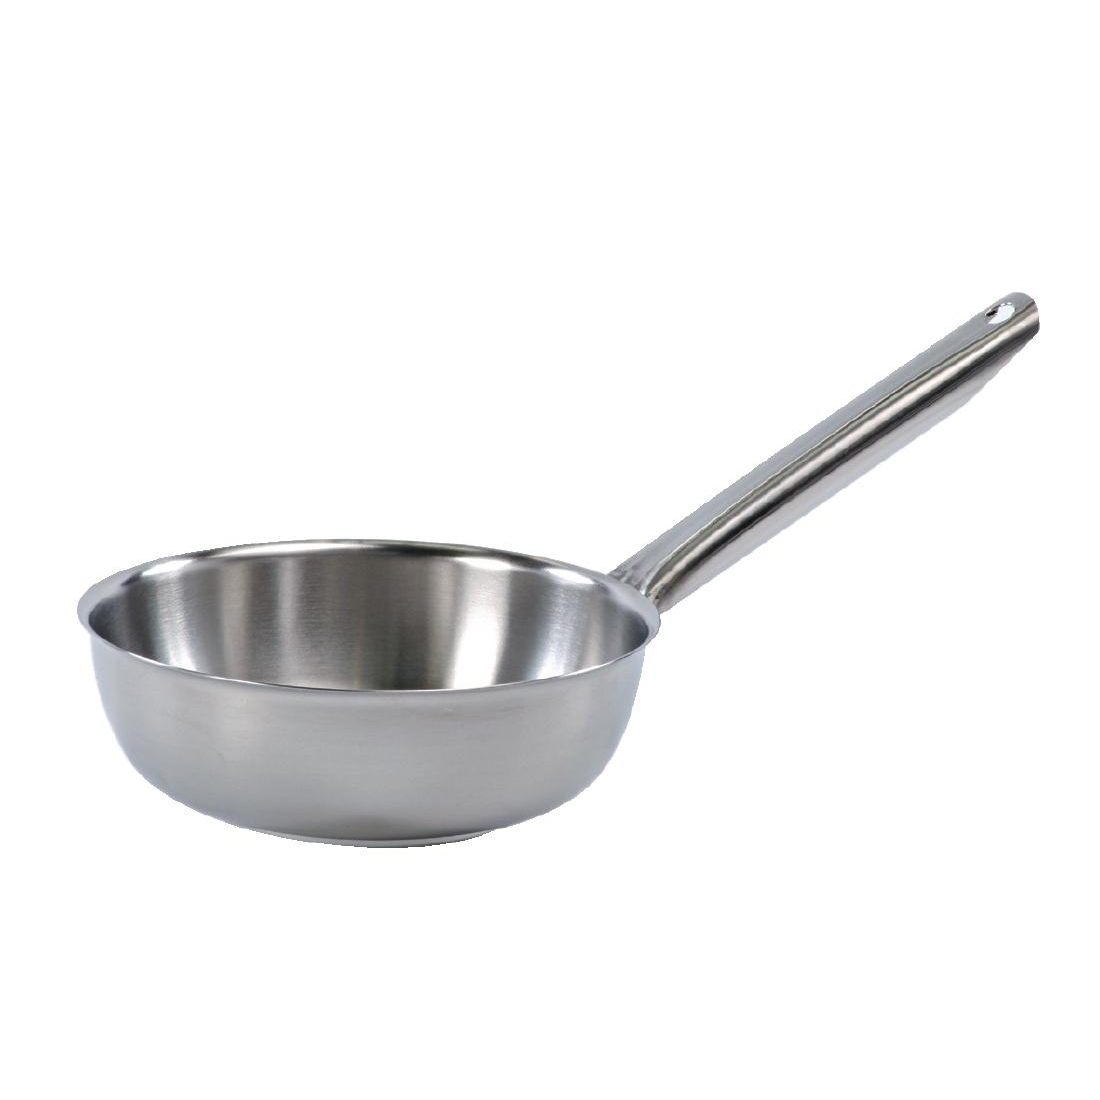 Bourgeat Tradition Plus Flared Saute Pan 240mm